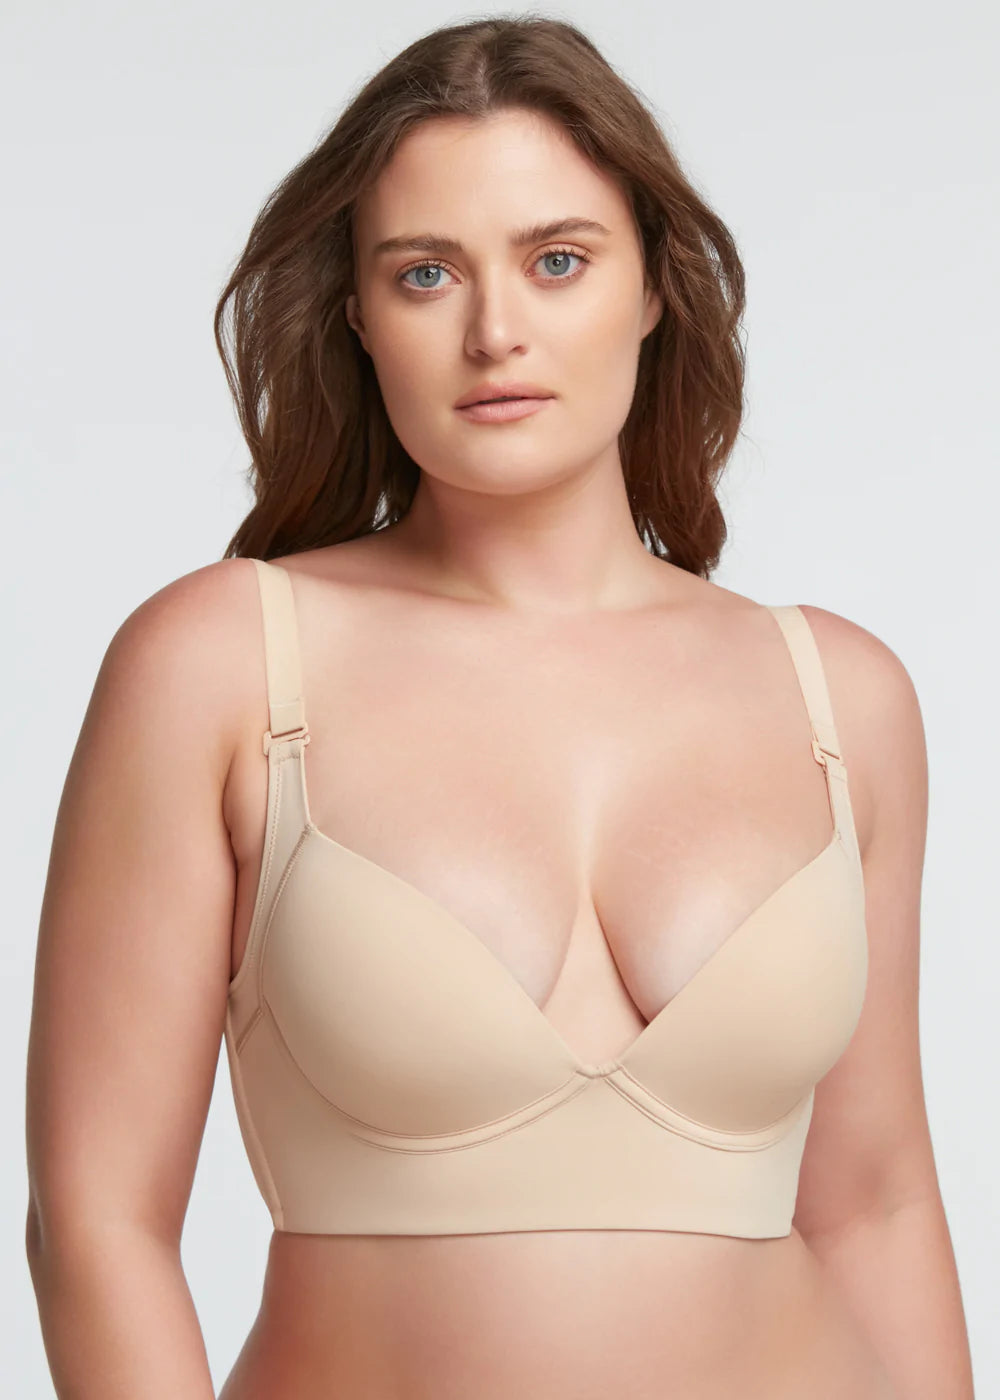 Women's Solid Color Wire Push Up Bra Set Adjustable for Small Bust and Side  Breast Control Spanks for Women (Beige, S) at  Women's Clothing store